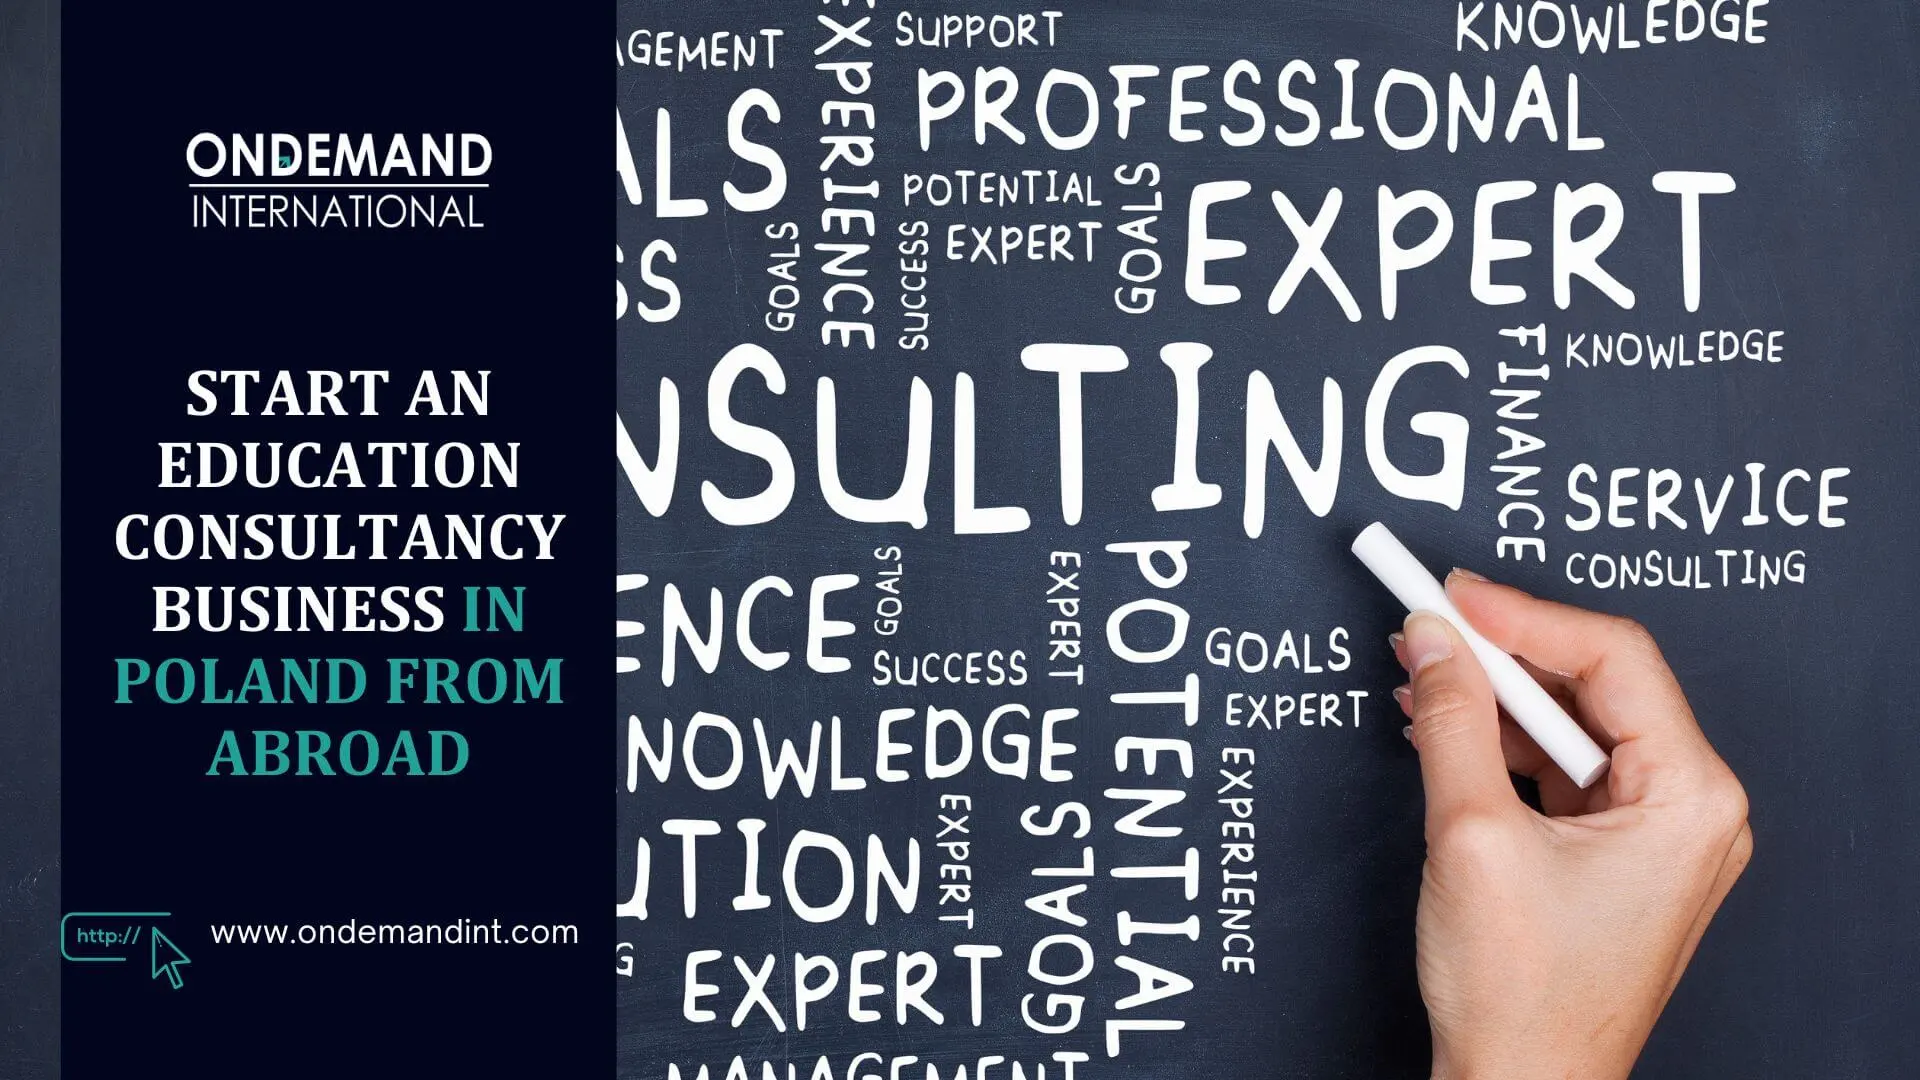 start an education consultancy business in poland